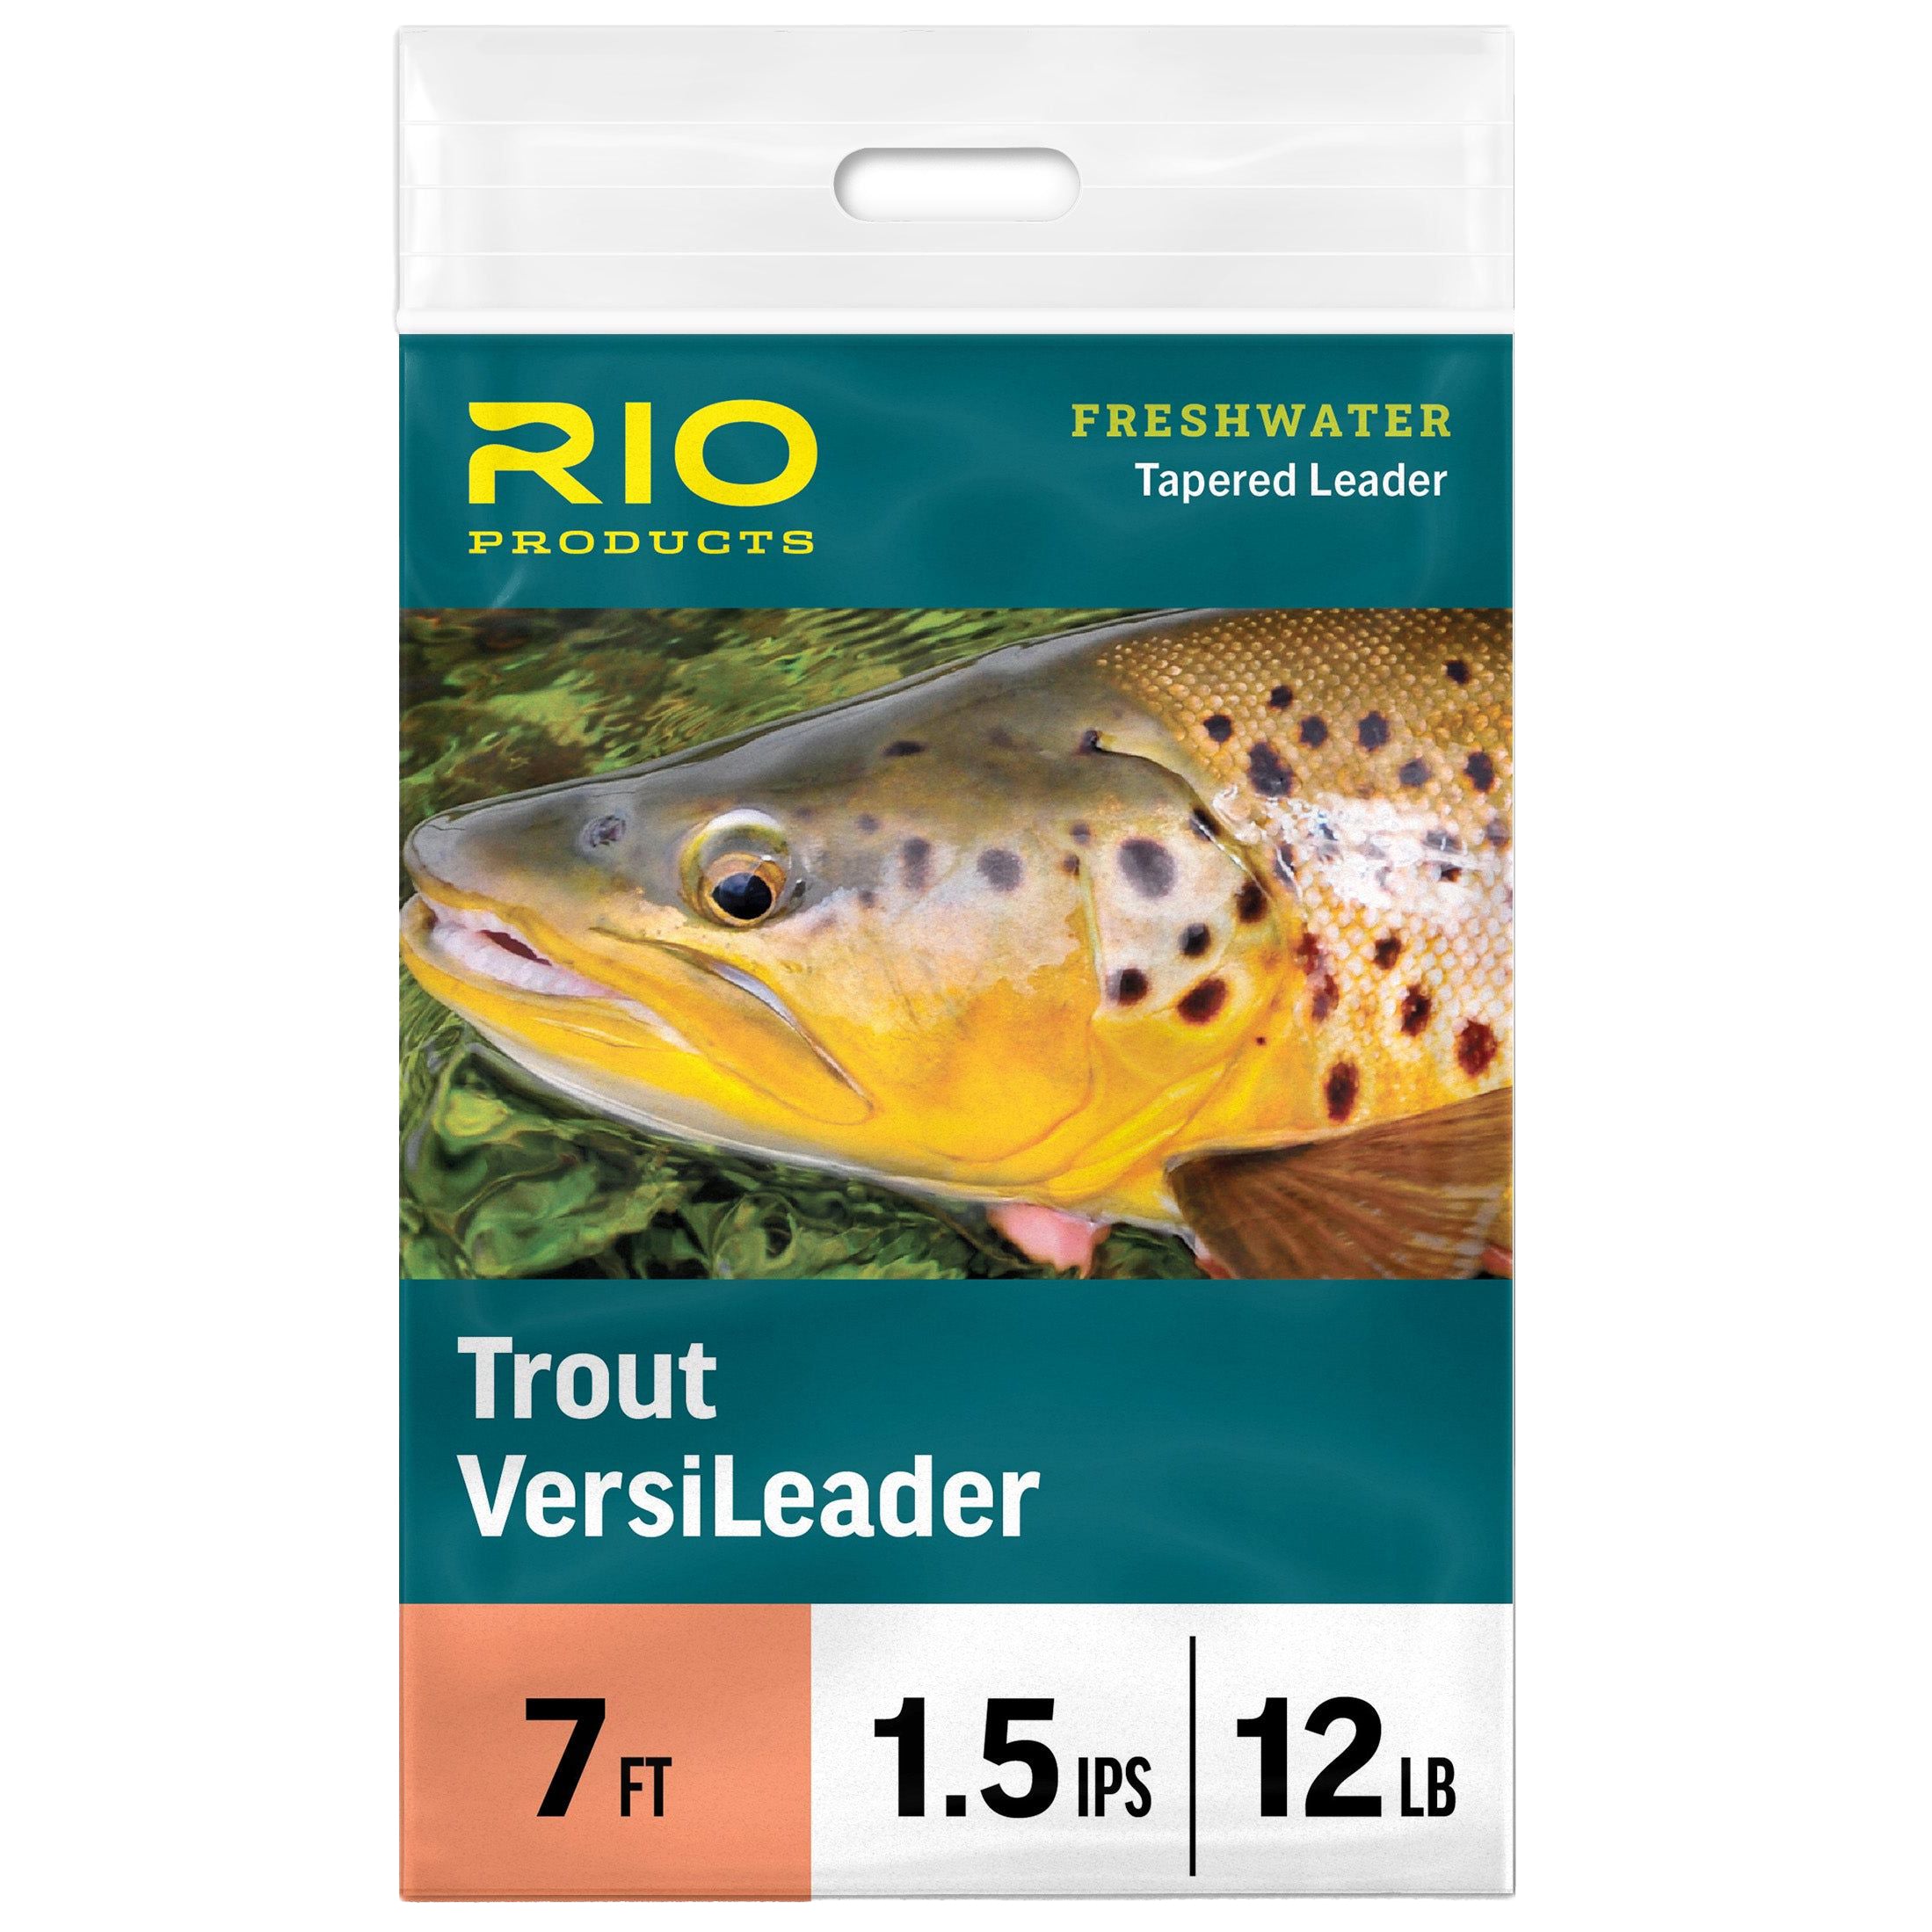 RIO Products Trout VersiLeader Image 01